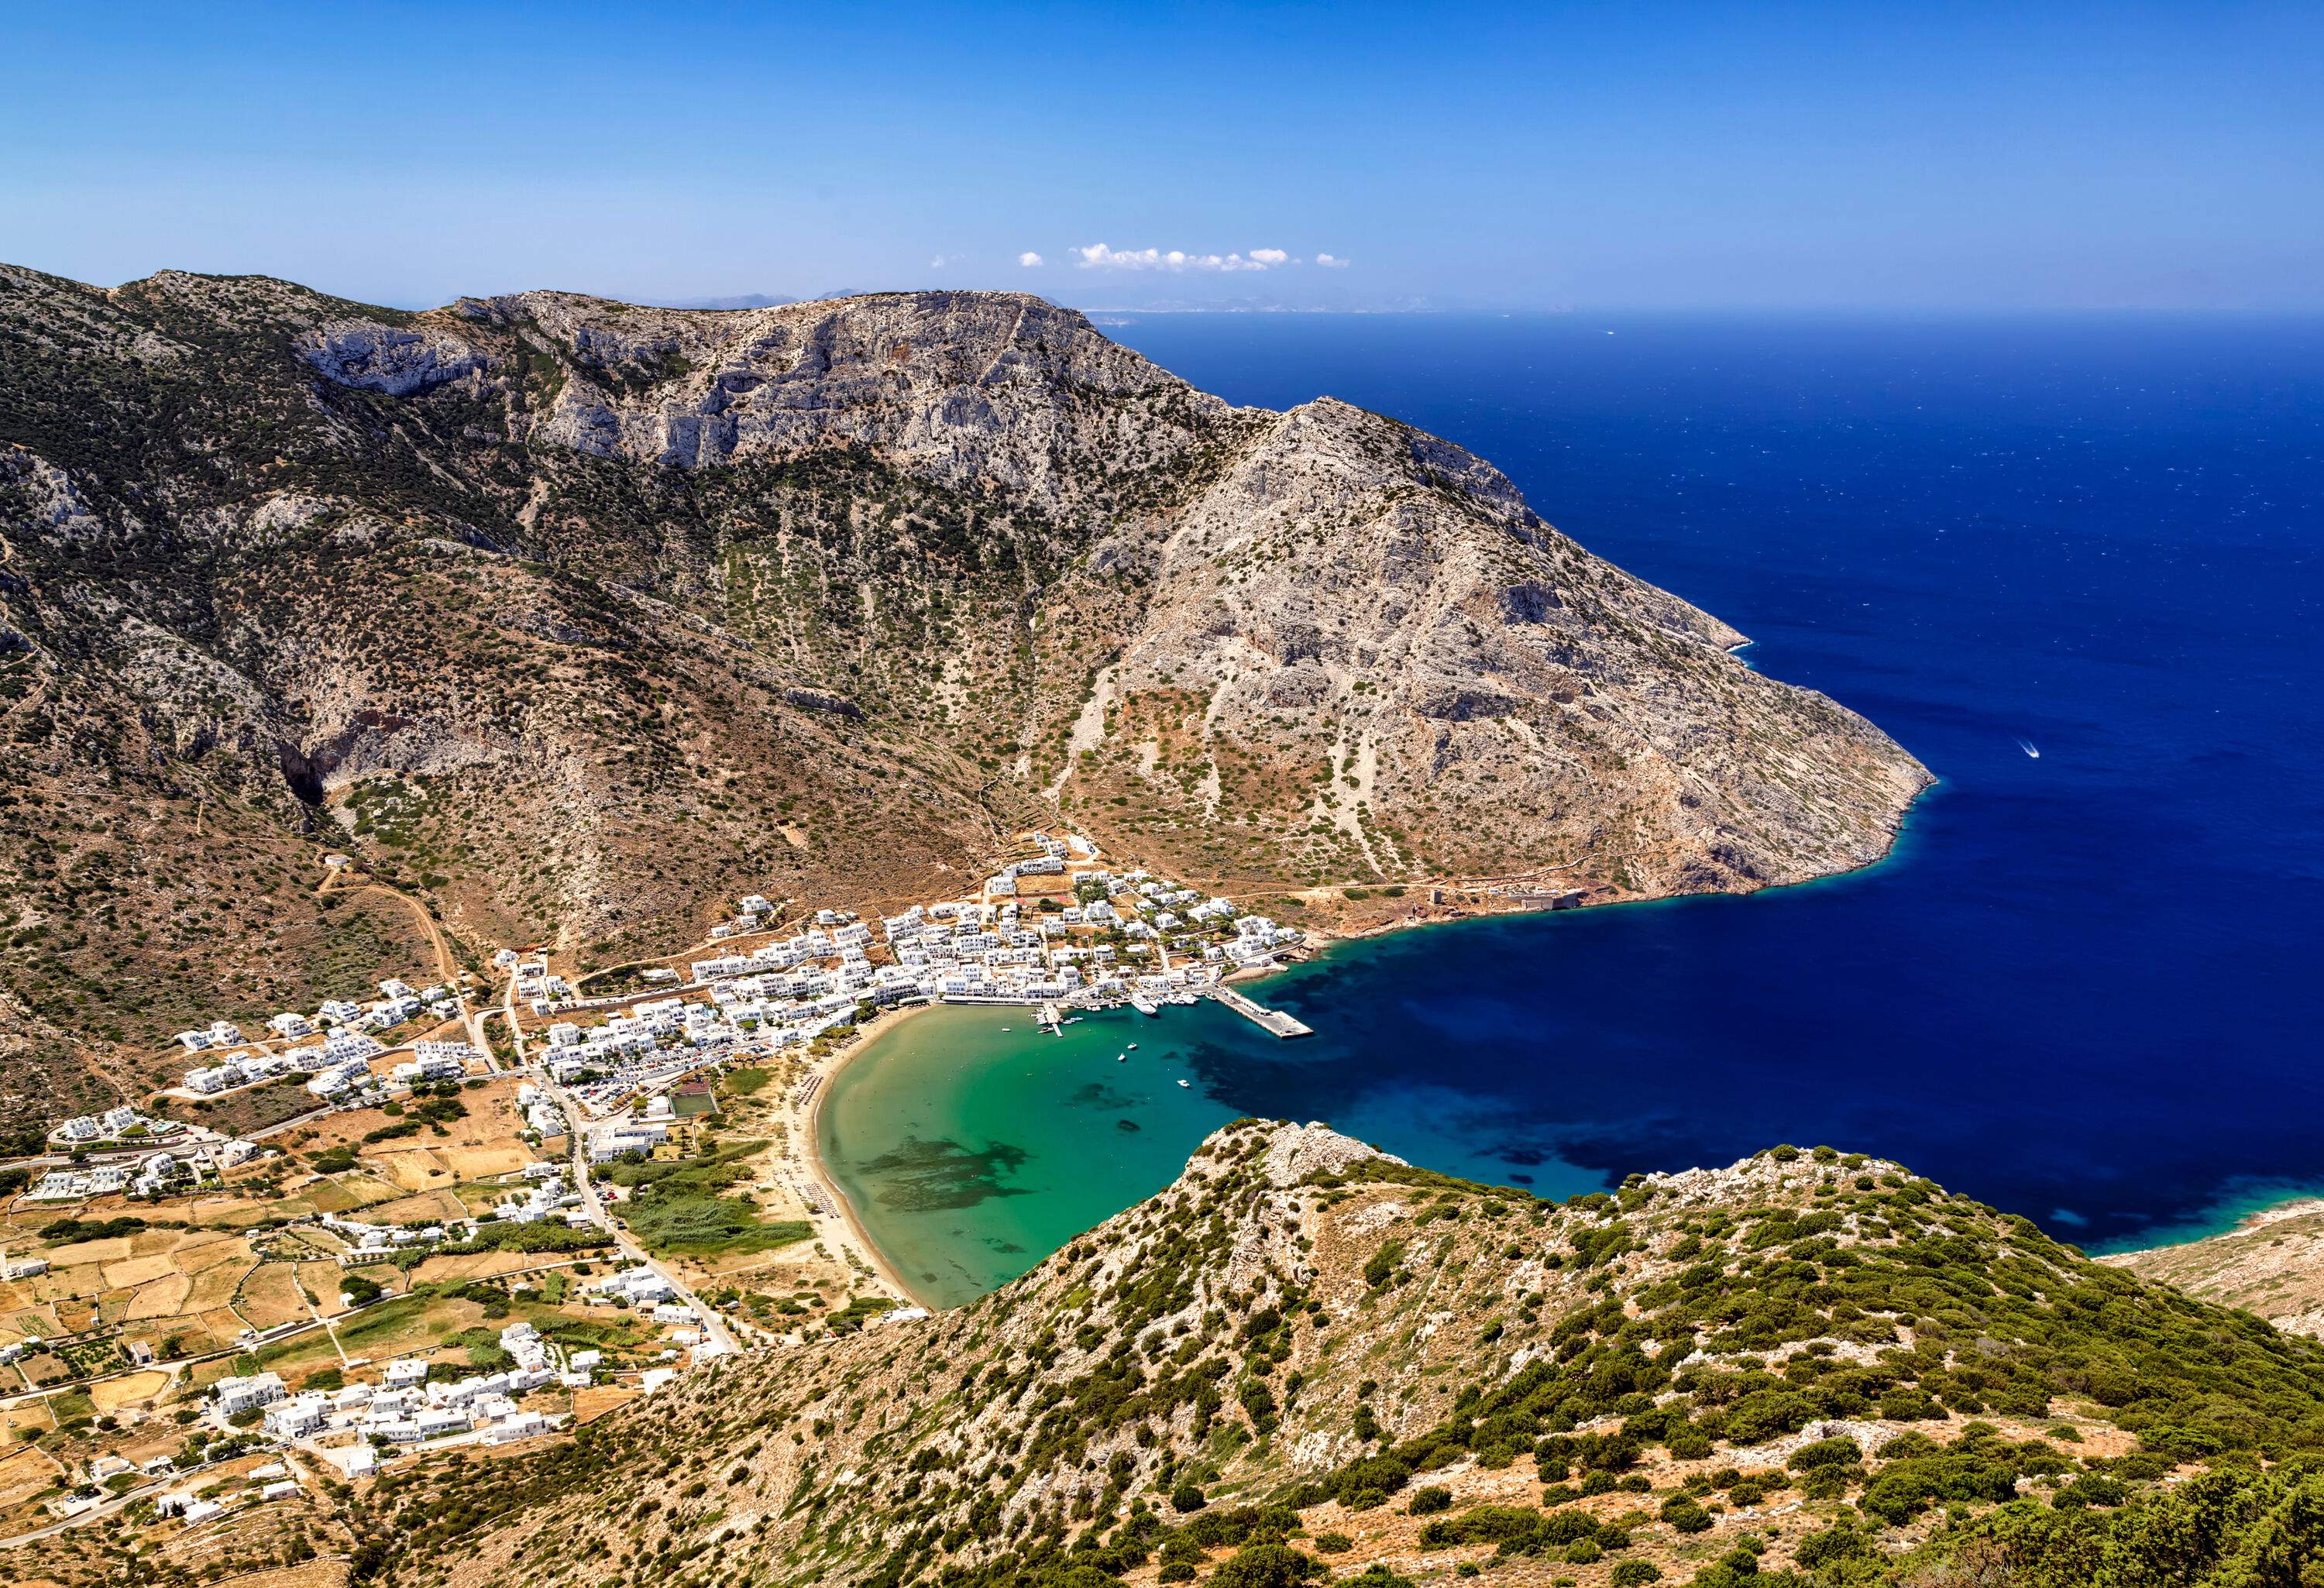 Aerial view of a white village and harbour among rocky hills with turquoise sea waters.